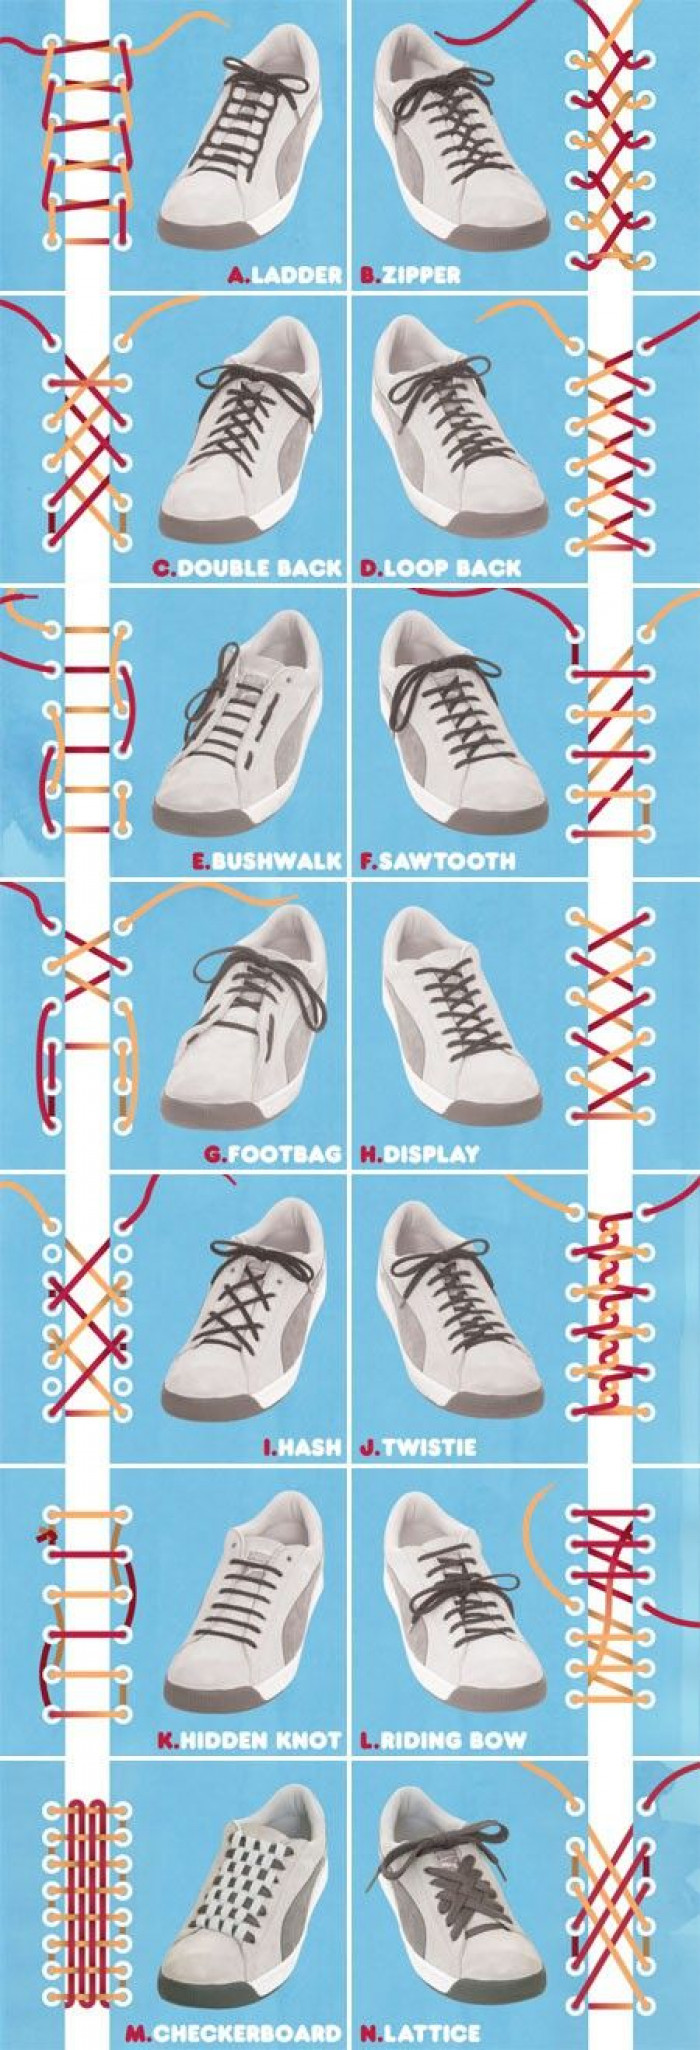 Stylish Ways To Tie Your Shoelaces